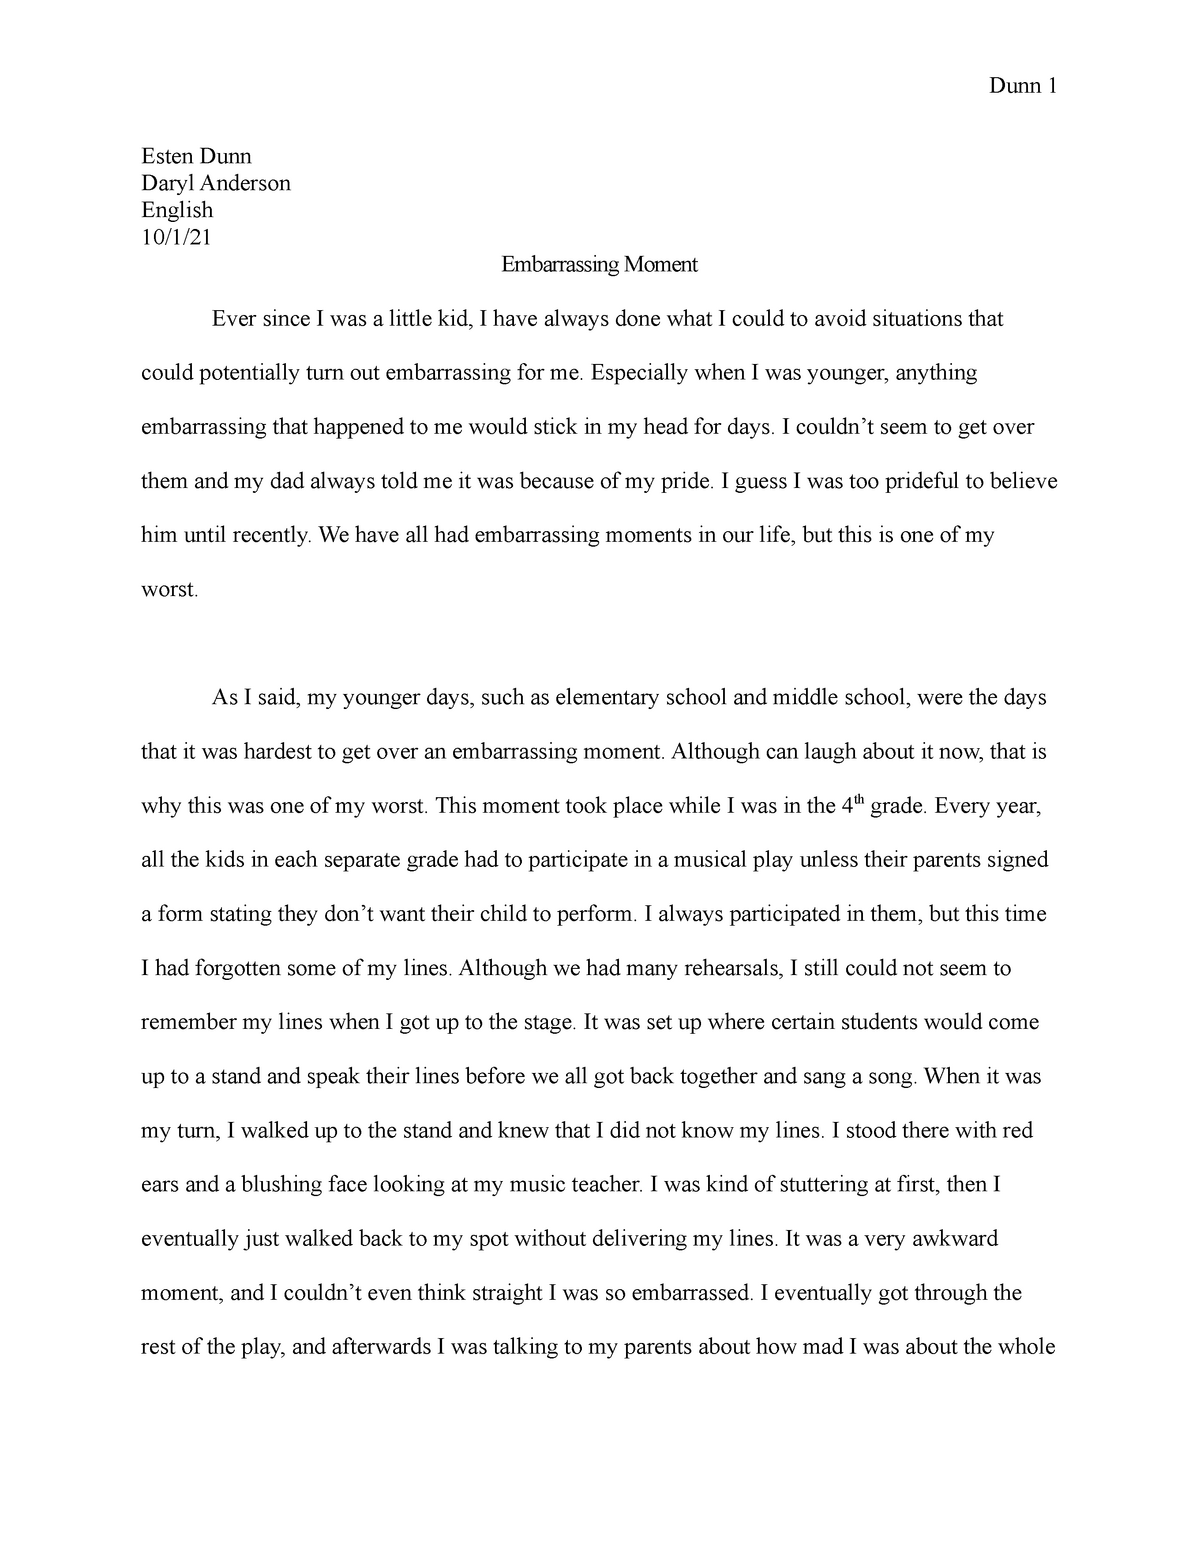 the most embarrassing moment in my life short essay